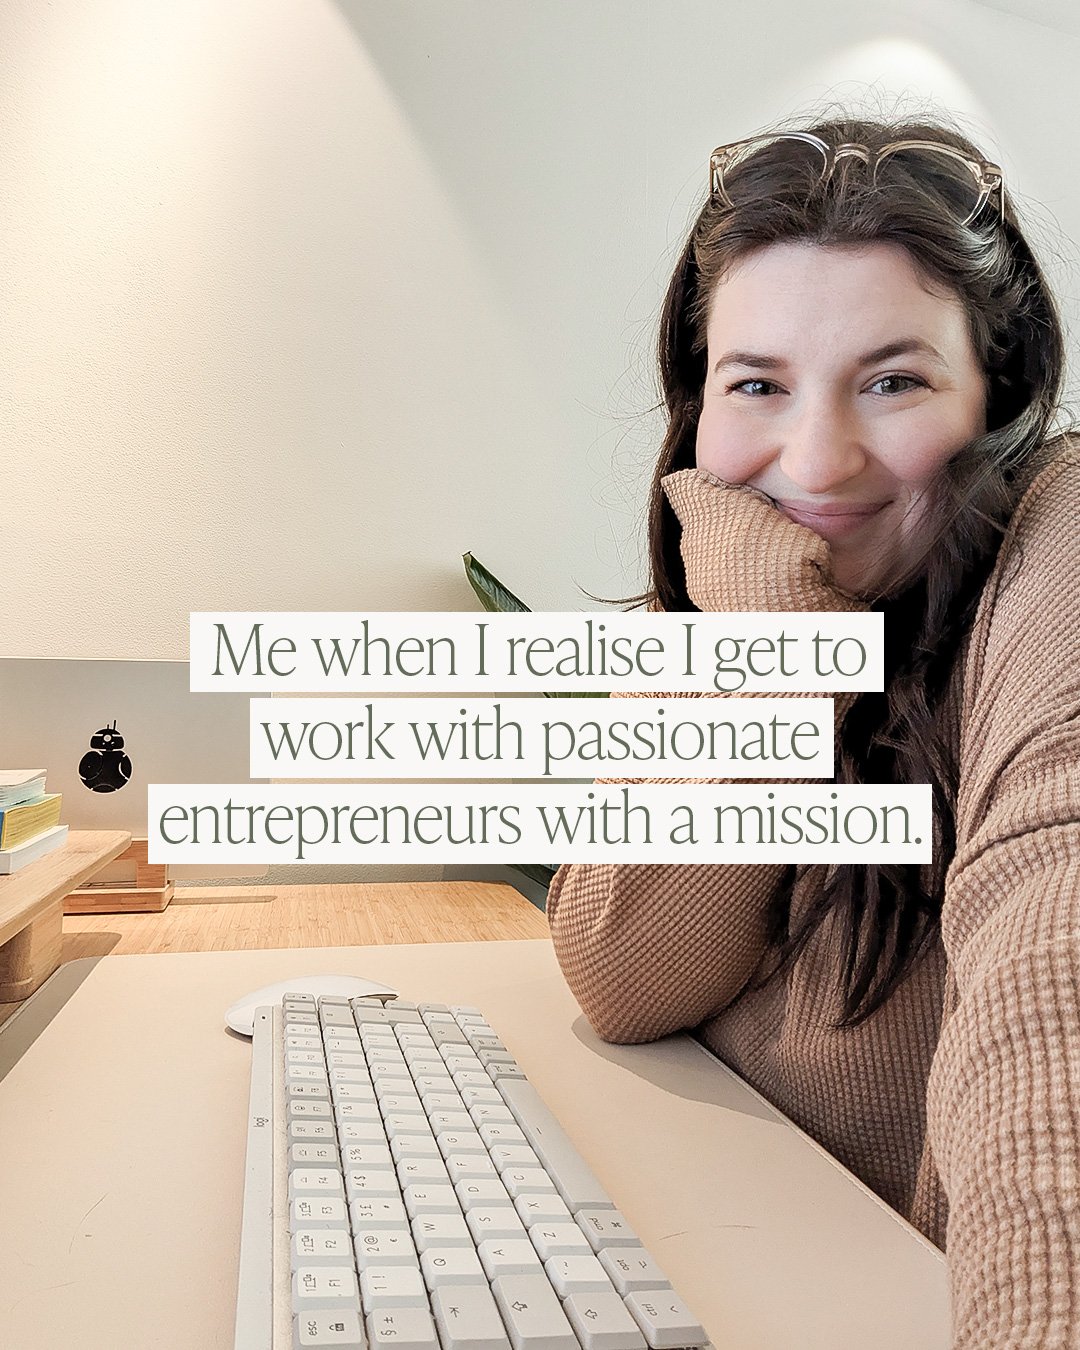 Your missions and projets fuel mine! 🤩

I started my business because I wanted my work to have an impact and contribute to passionate businesses that make the world a better place. I get SO giddy and excited hearing about your WHY and your story. La